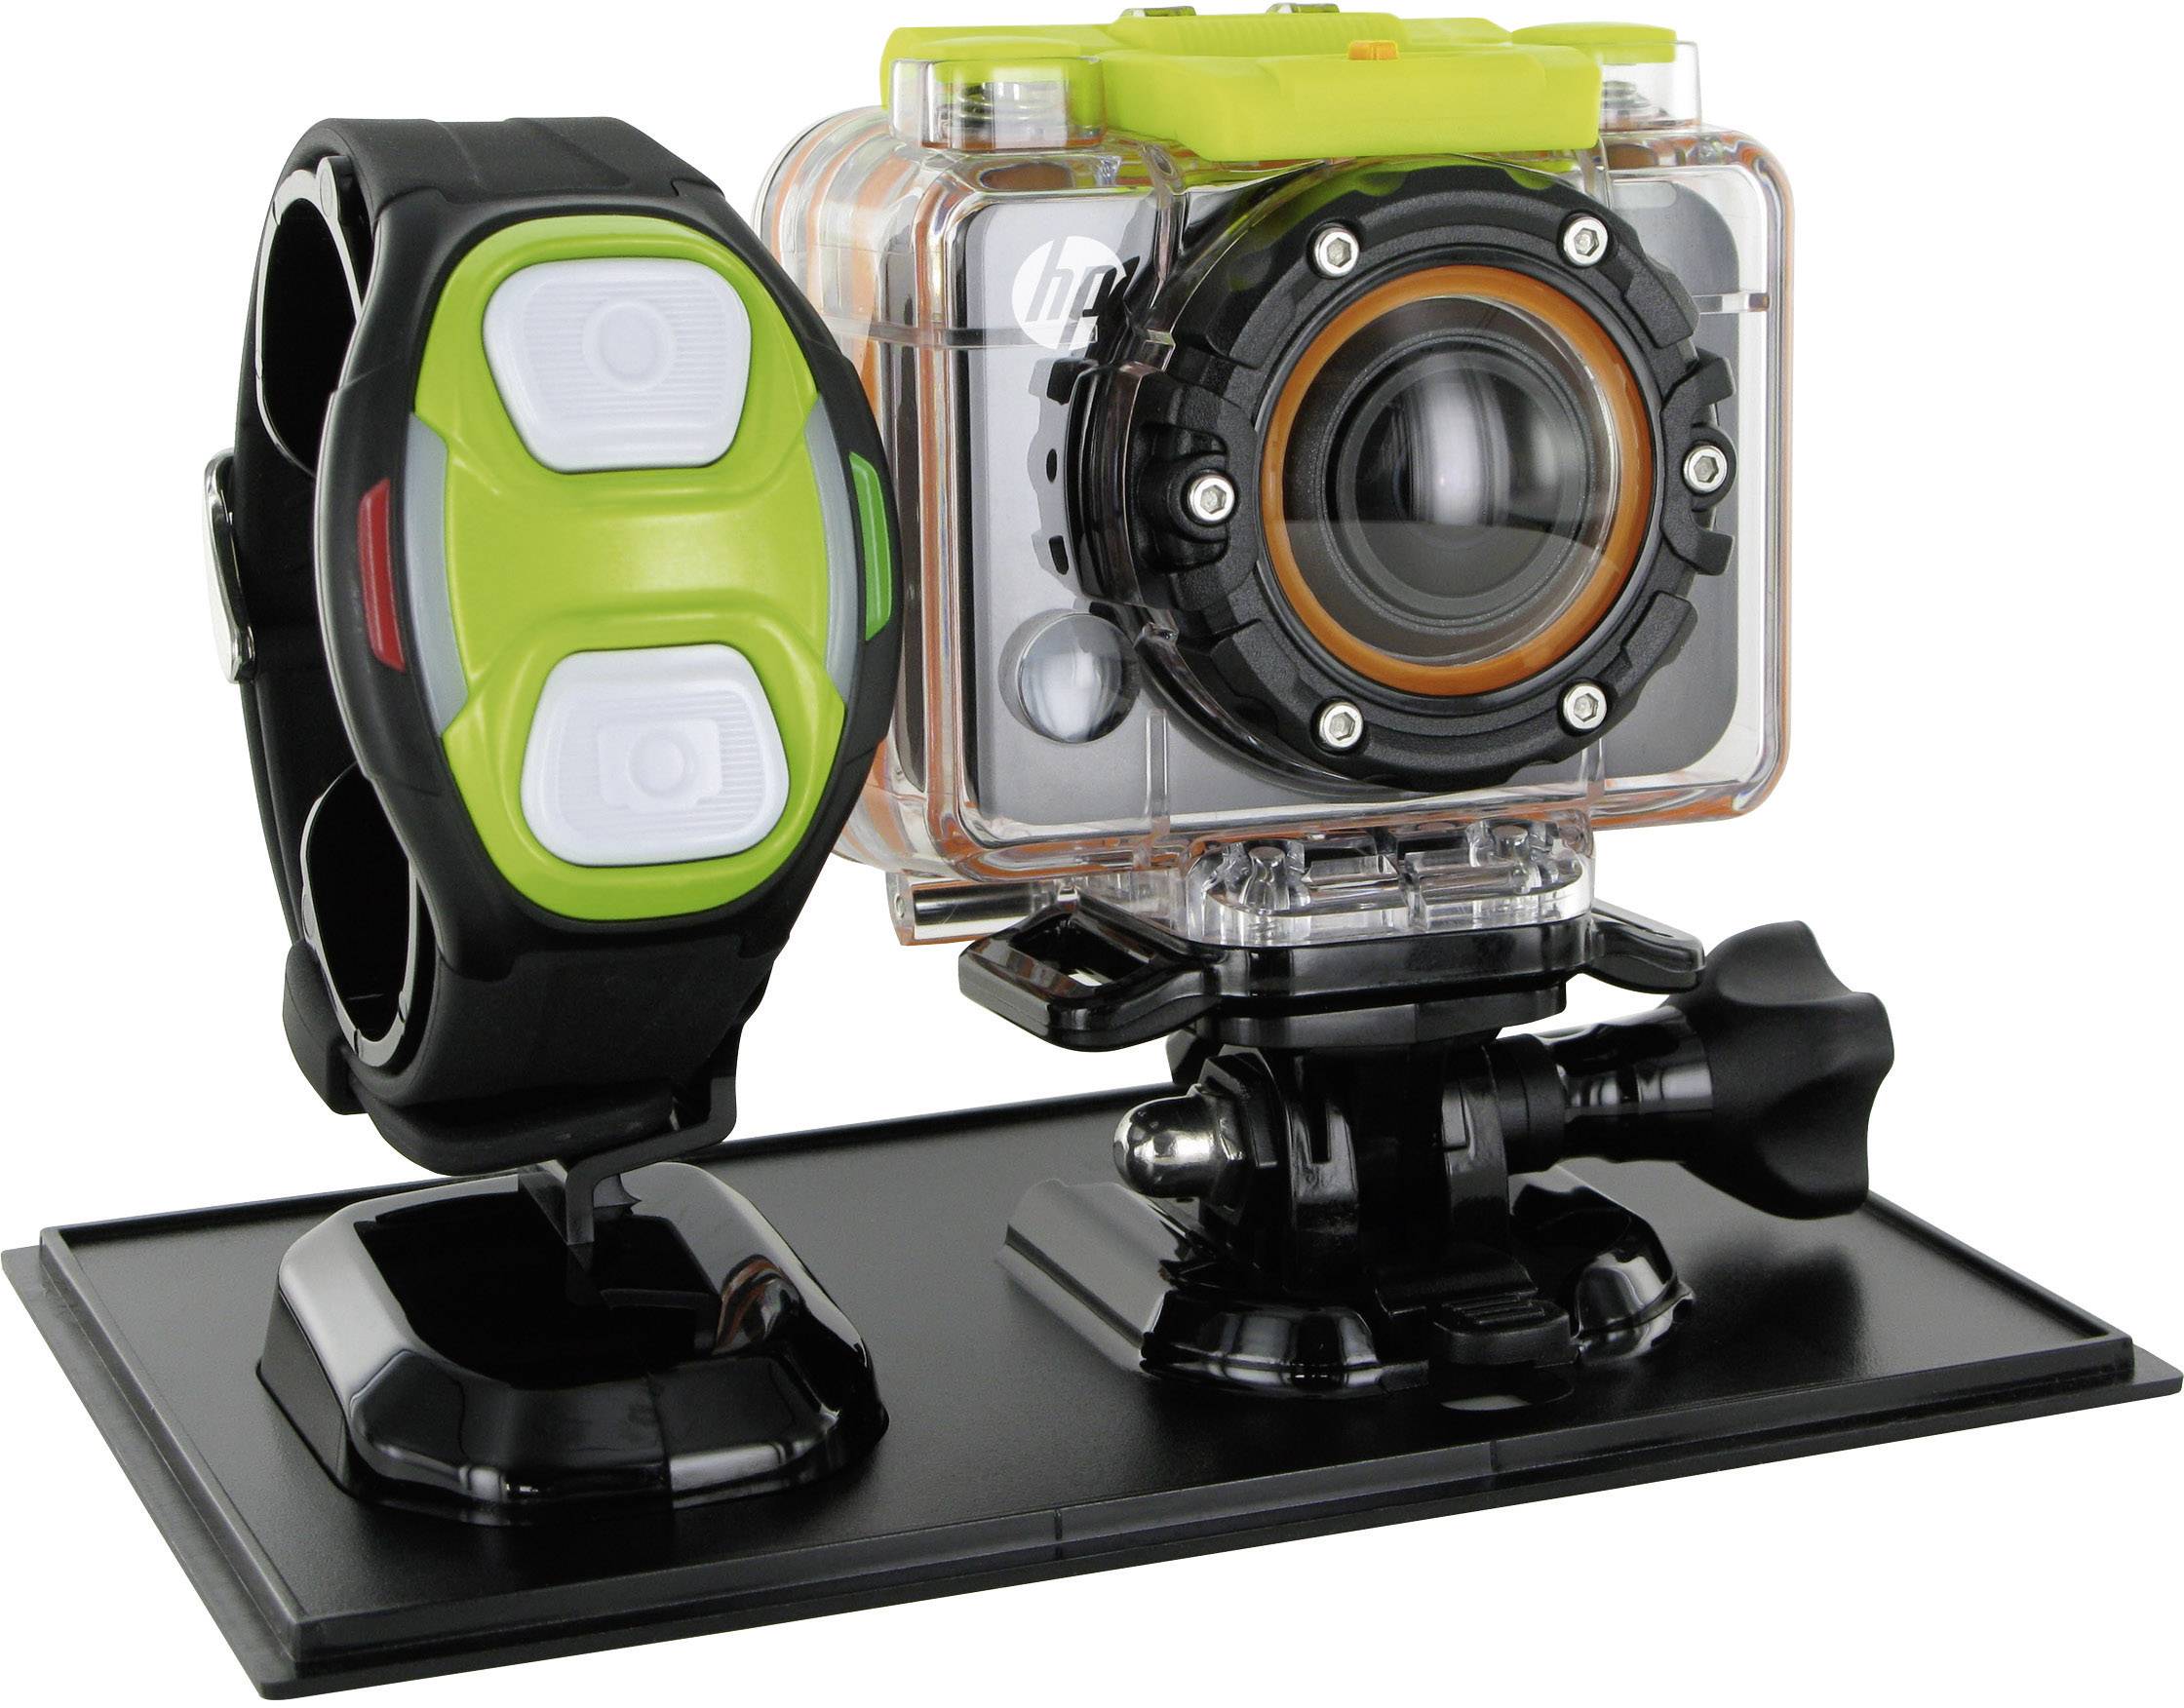 HP ac200w Action Camera